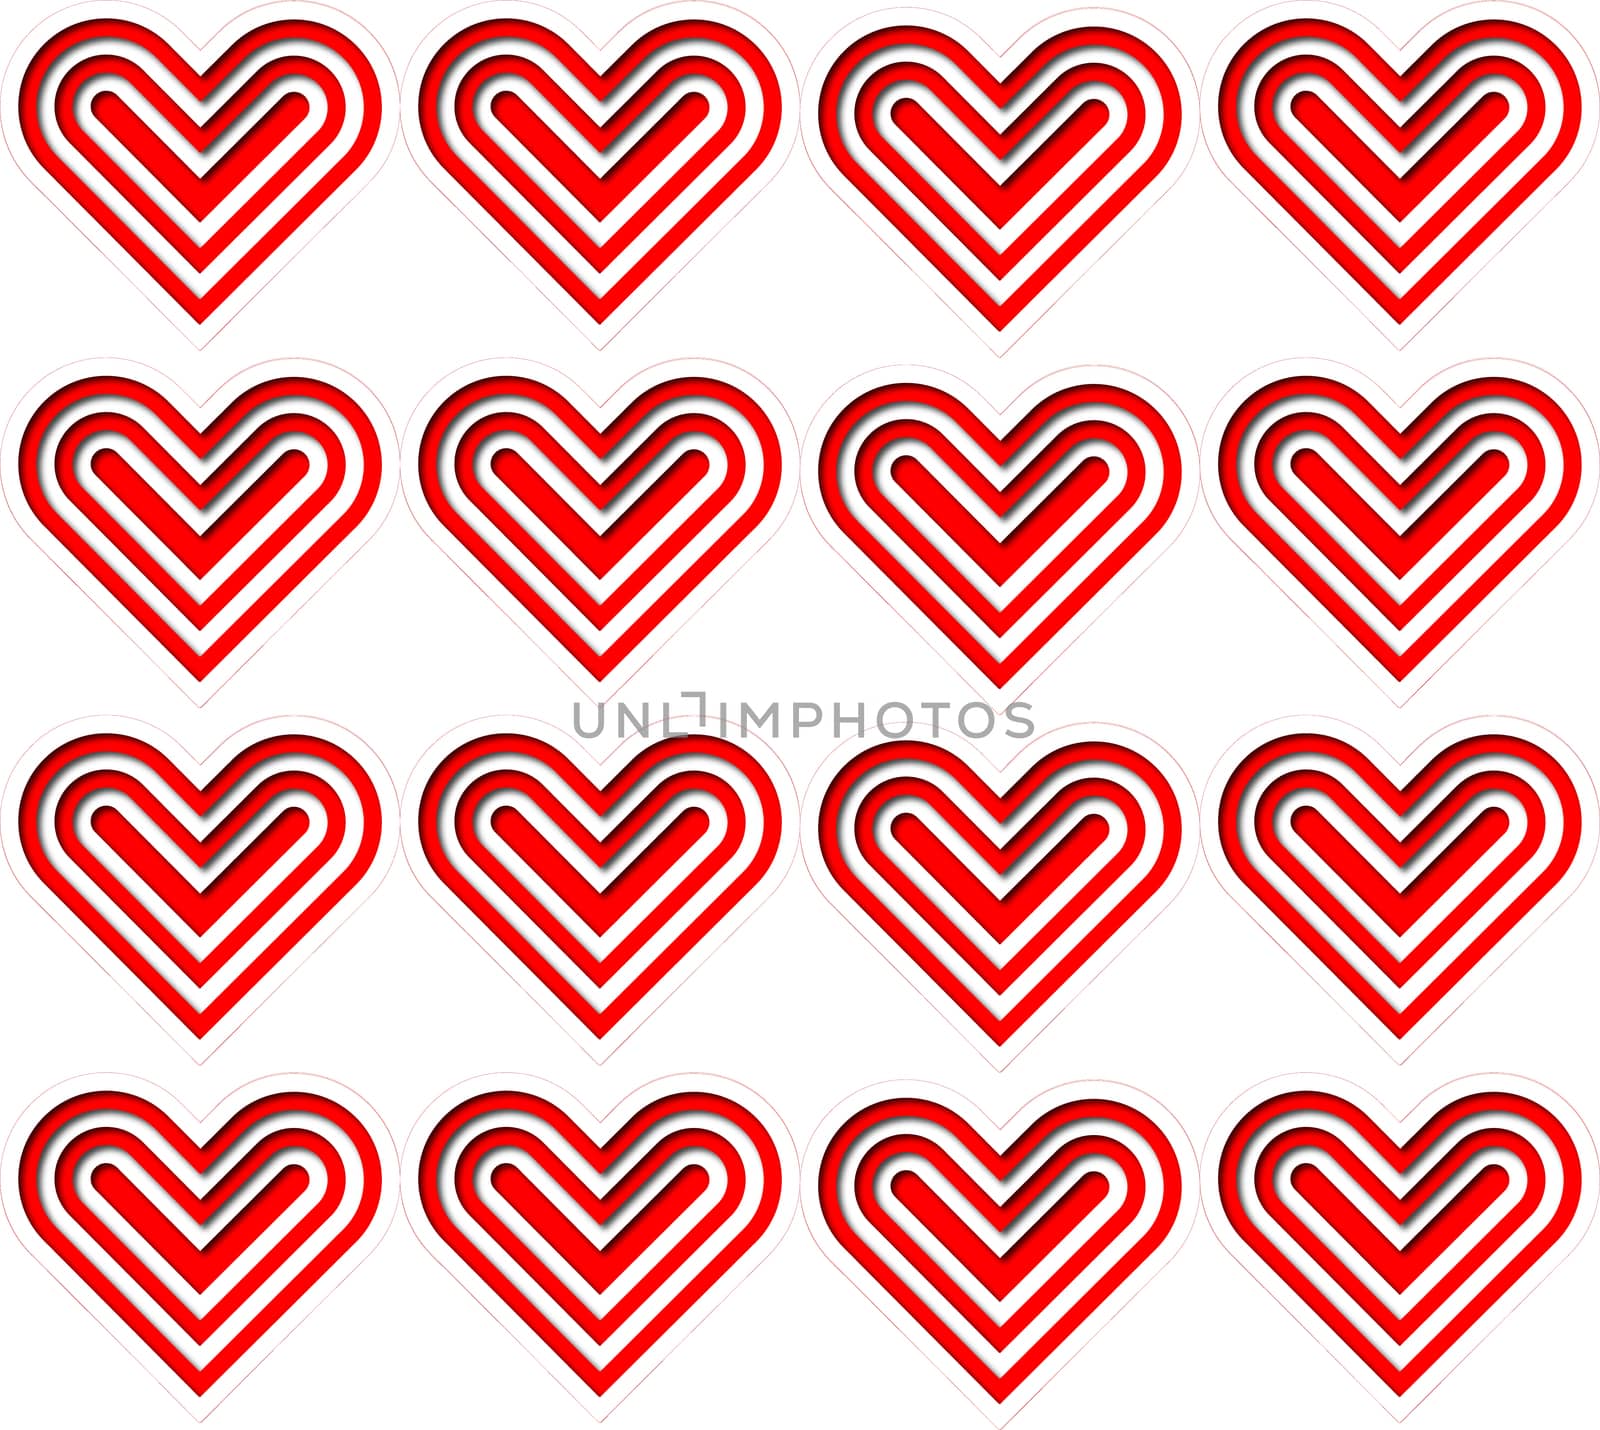 a square pattern made of layered red and white hearts, papercut style, on white background. Illustration art.